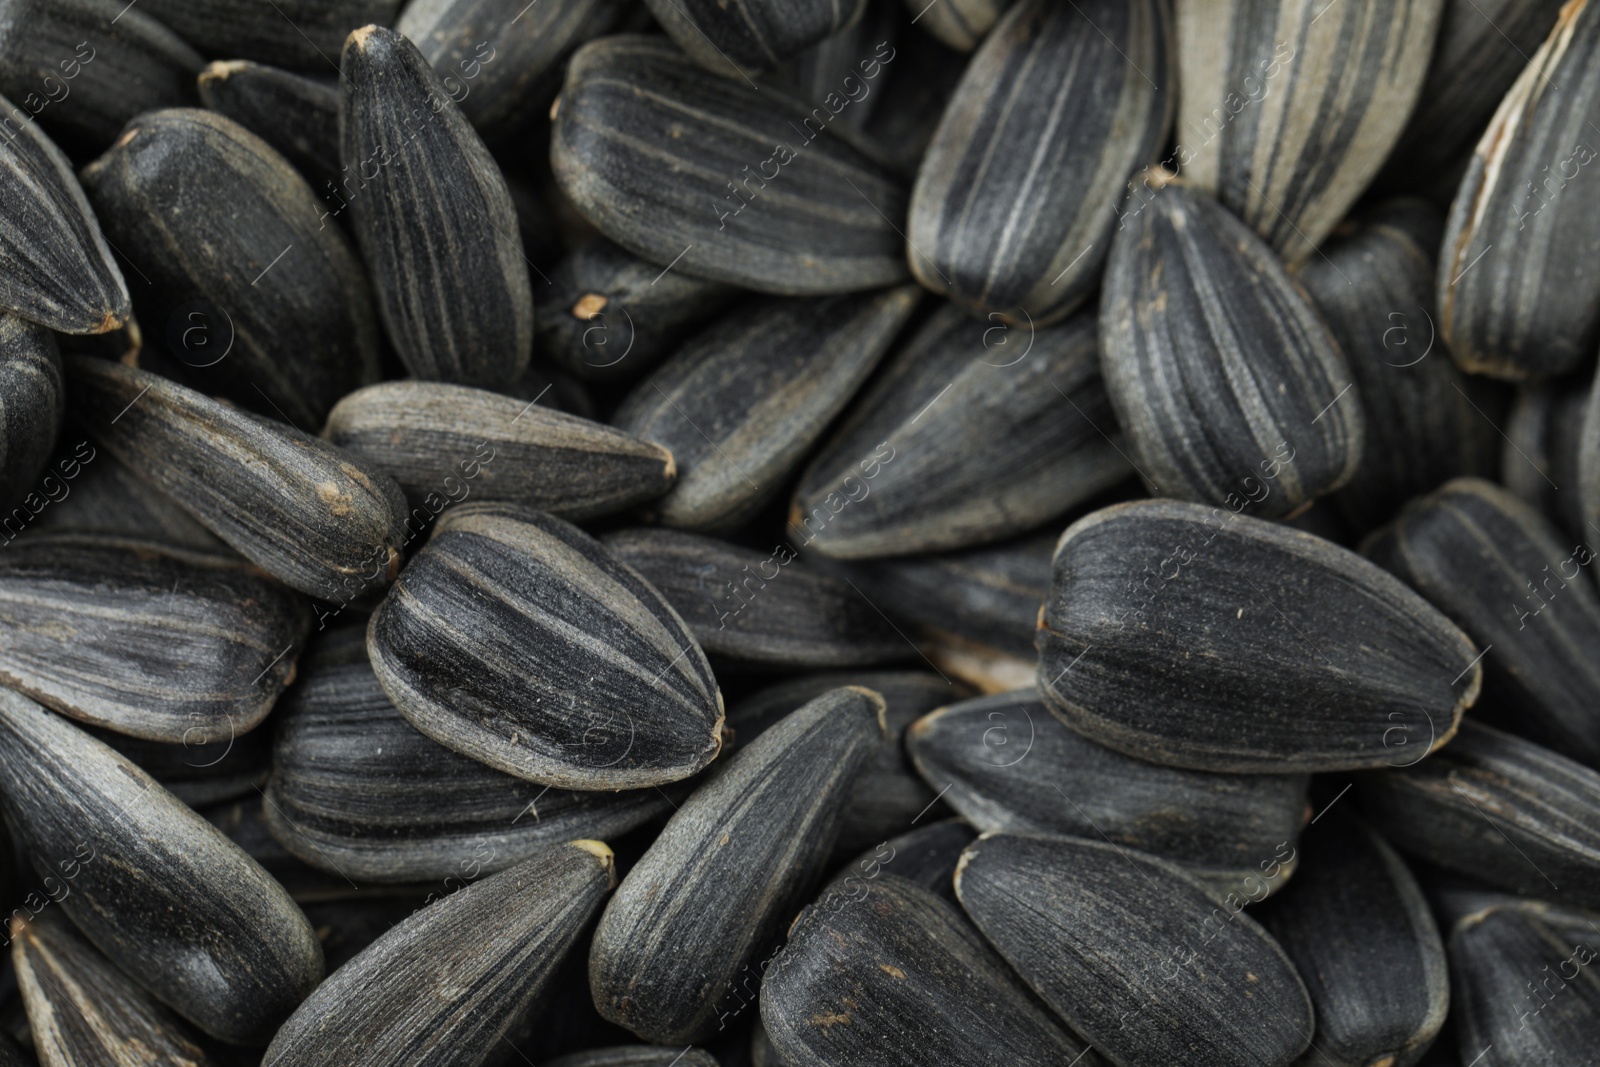 Photo of Raw sunflower seeds as background, closeup view